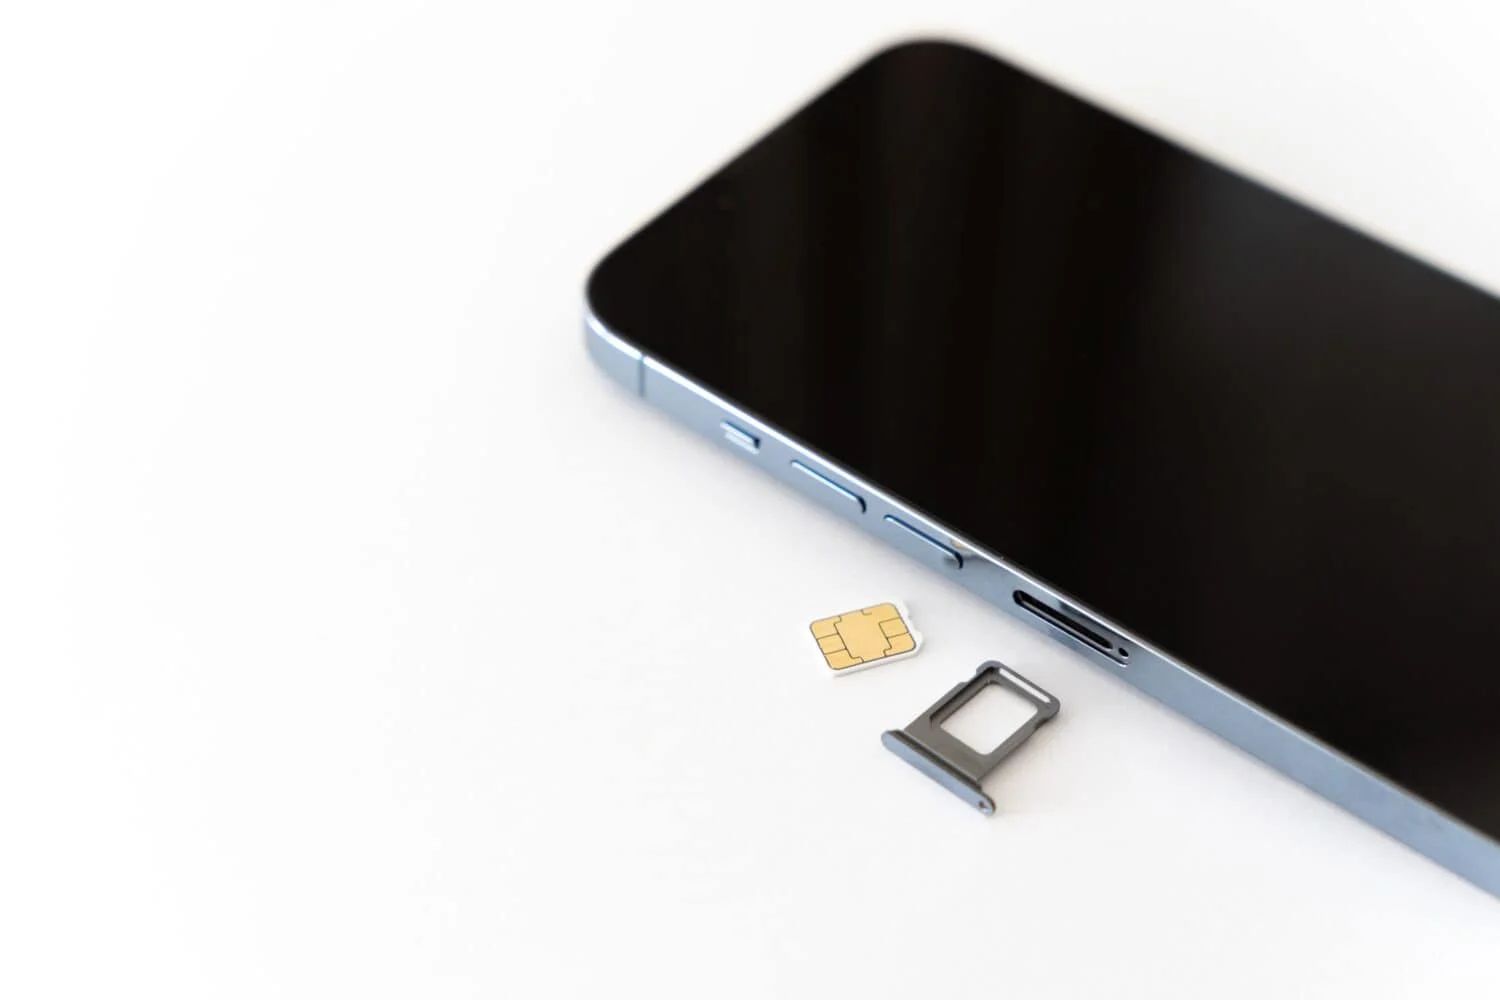 Locating SIM Card Slot On IPhone 6: A Quick Guide